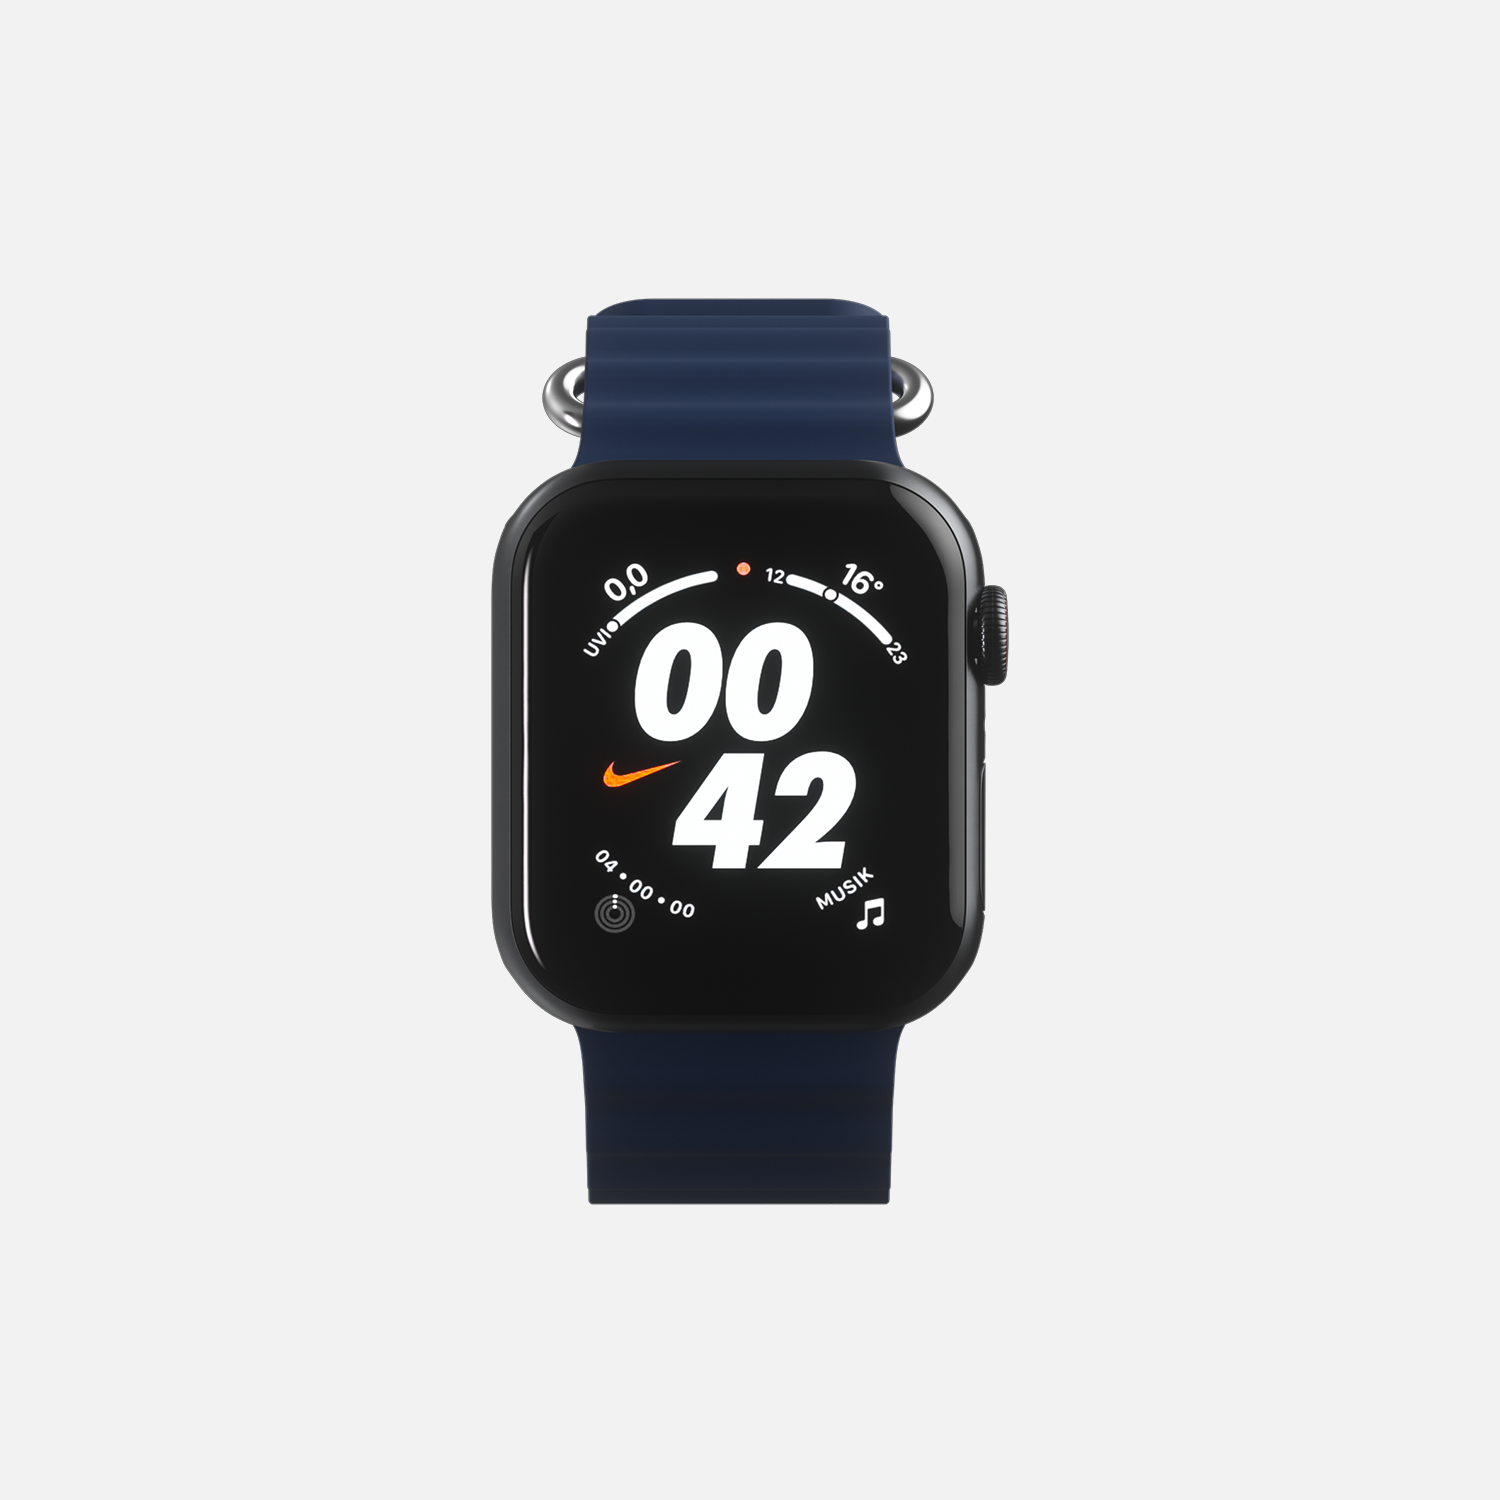 Smartwatch with Nike interface and blue sports band isolated on white background."